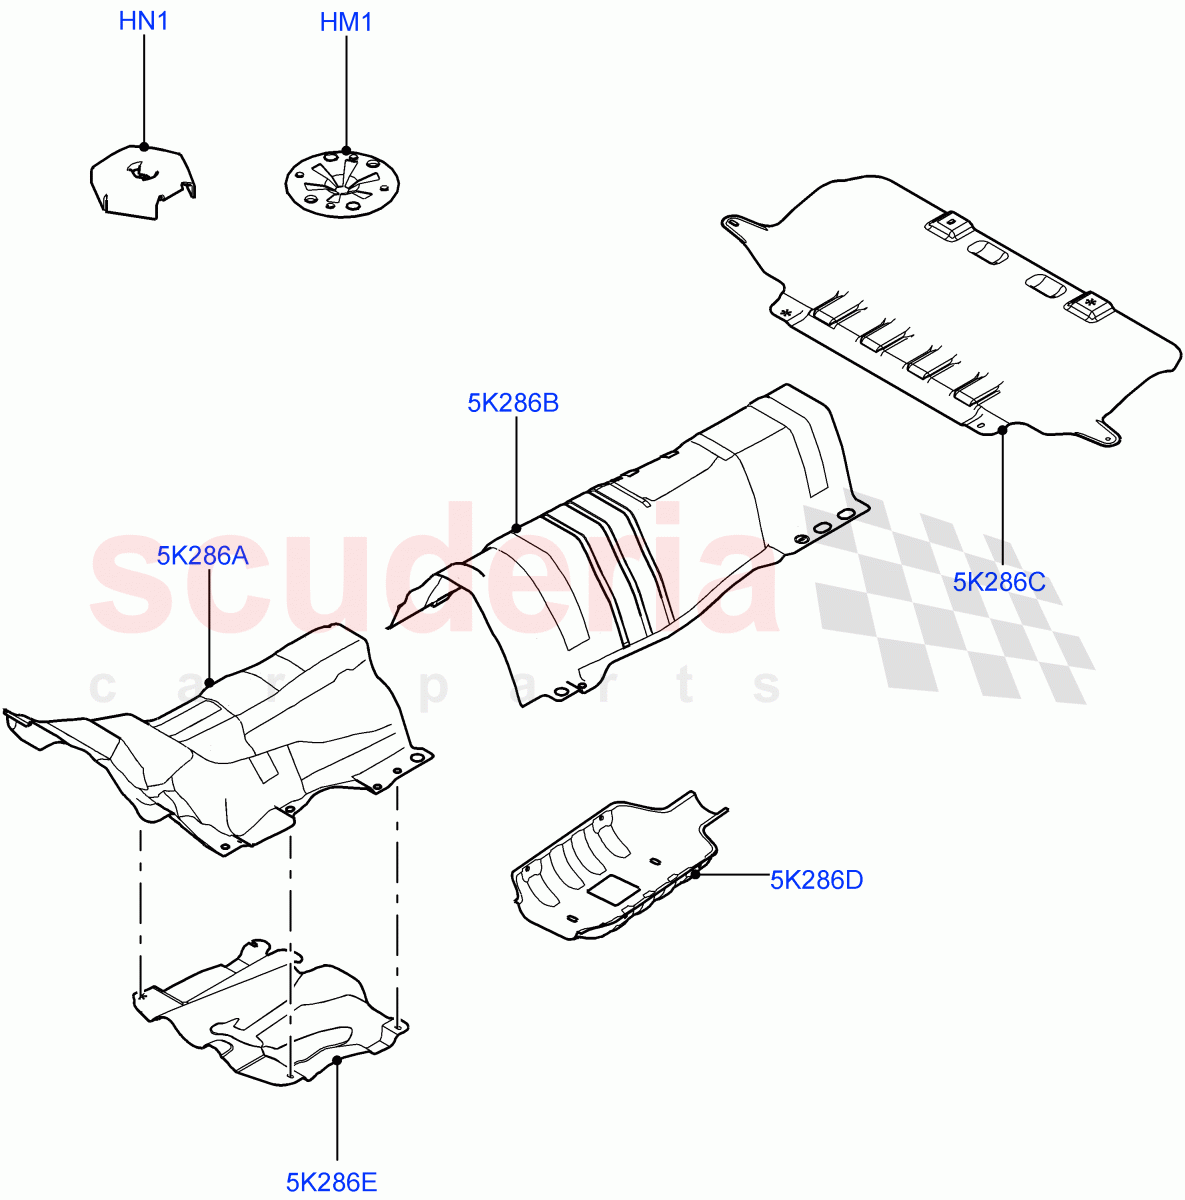 Heat Shields - Exhaust System(2.2L CR DI 16V Diesel) of Land Rover Land Rover Range Rover Evoque (2012-2018) [2.2 Single Turbo Diesel]